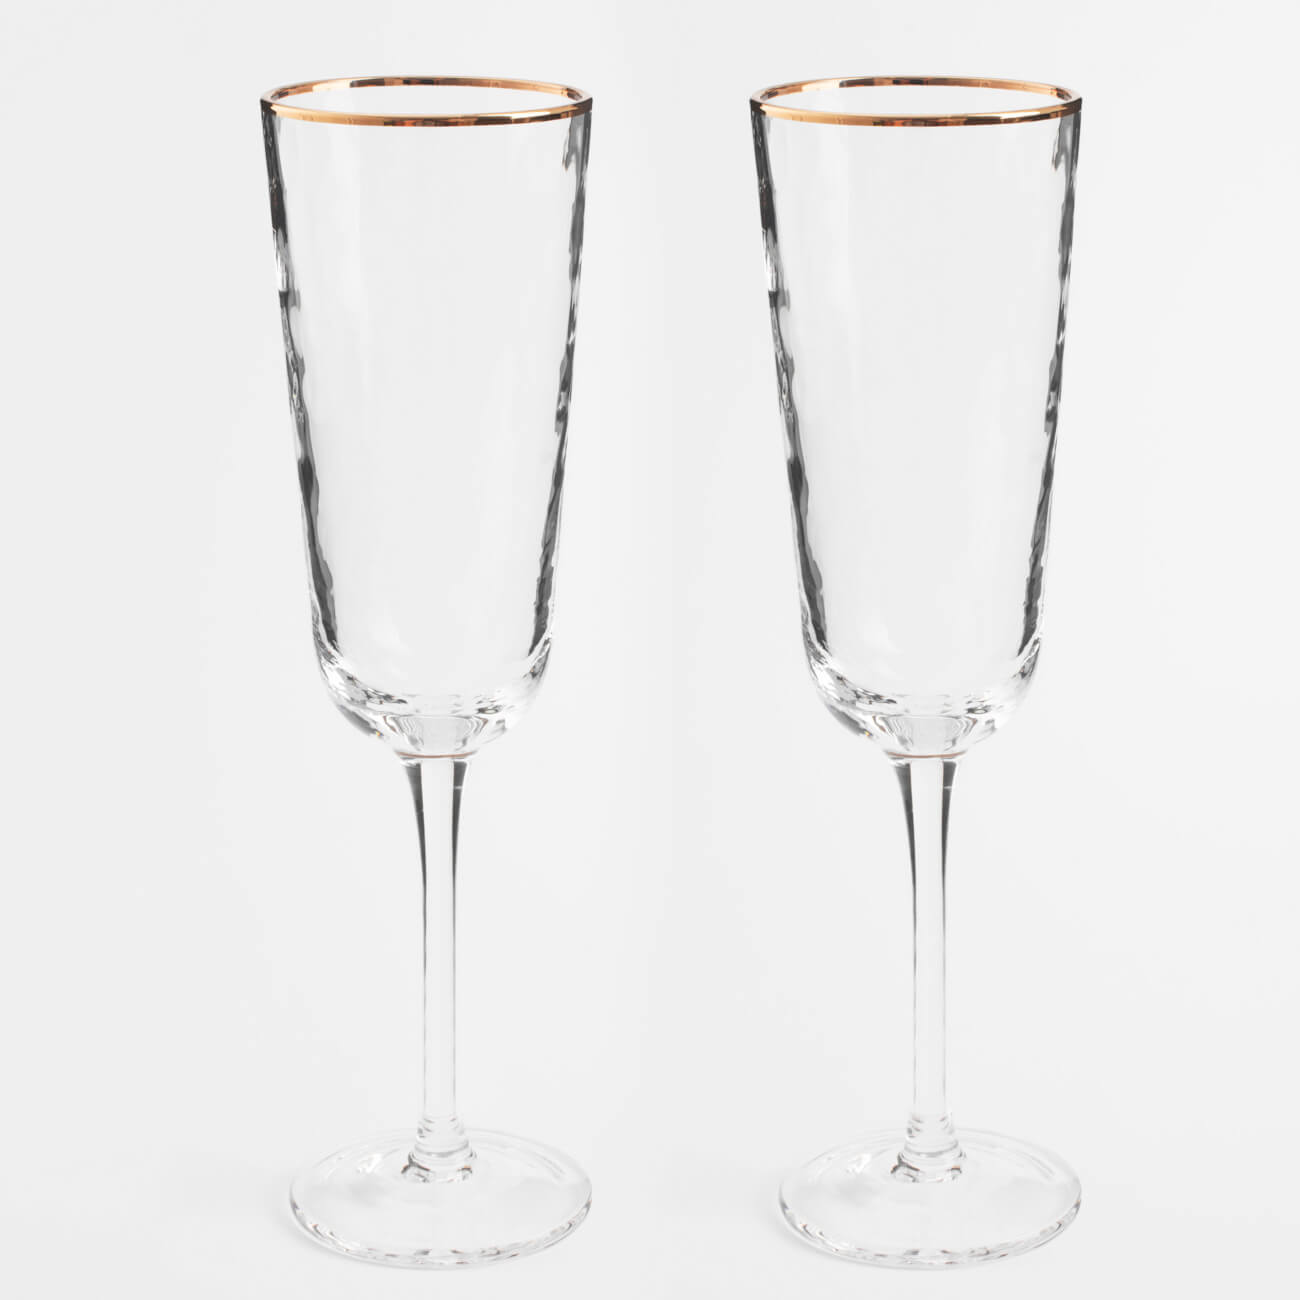 Champagne glass, 190 ml, 2 pcs, glass, with golden edging, Liomea gold изображение № 1